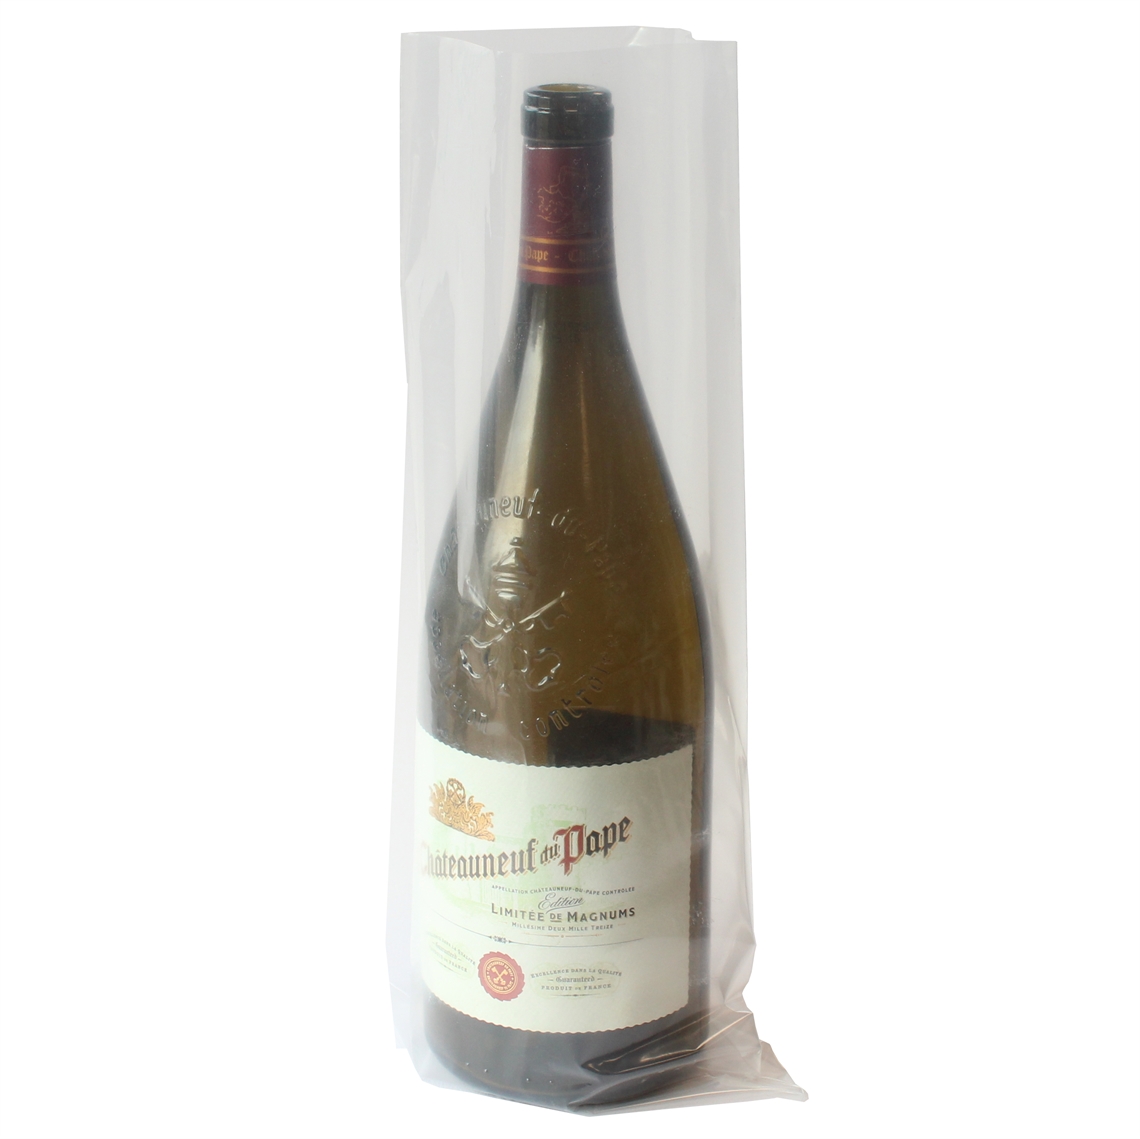 View more meaco from our Wine Bottle Cellar Sleeves range